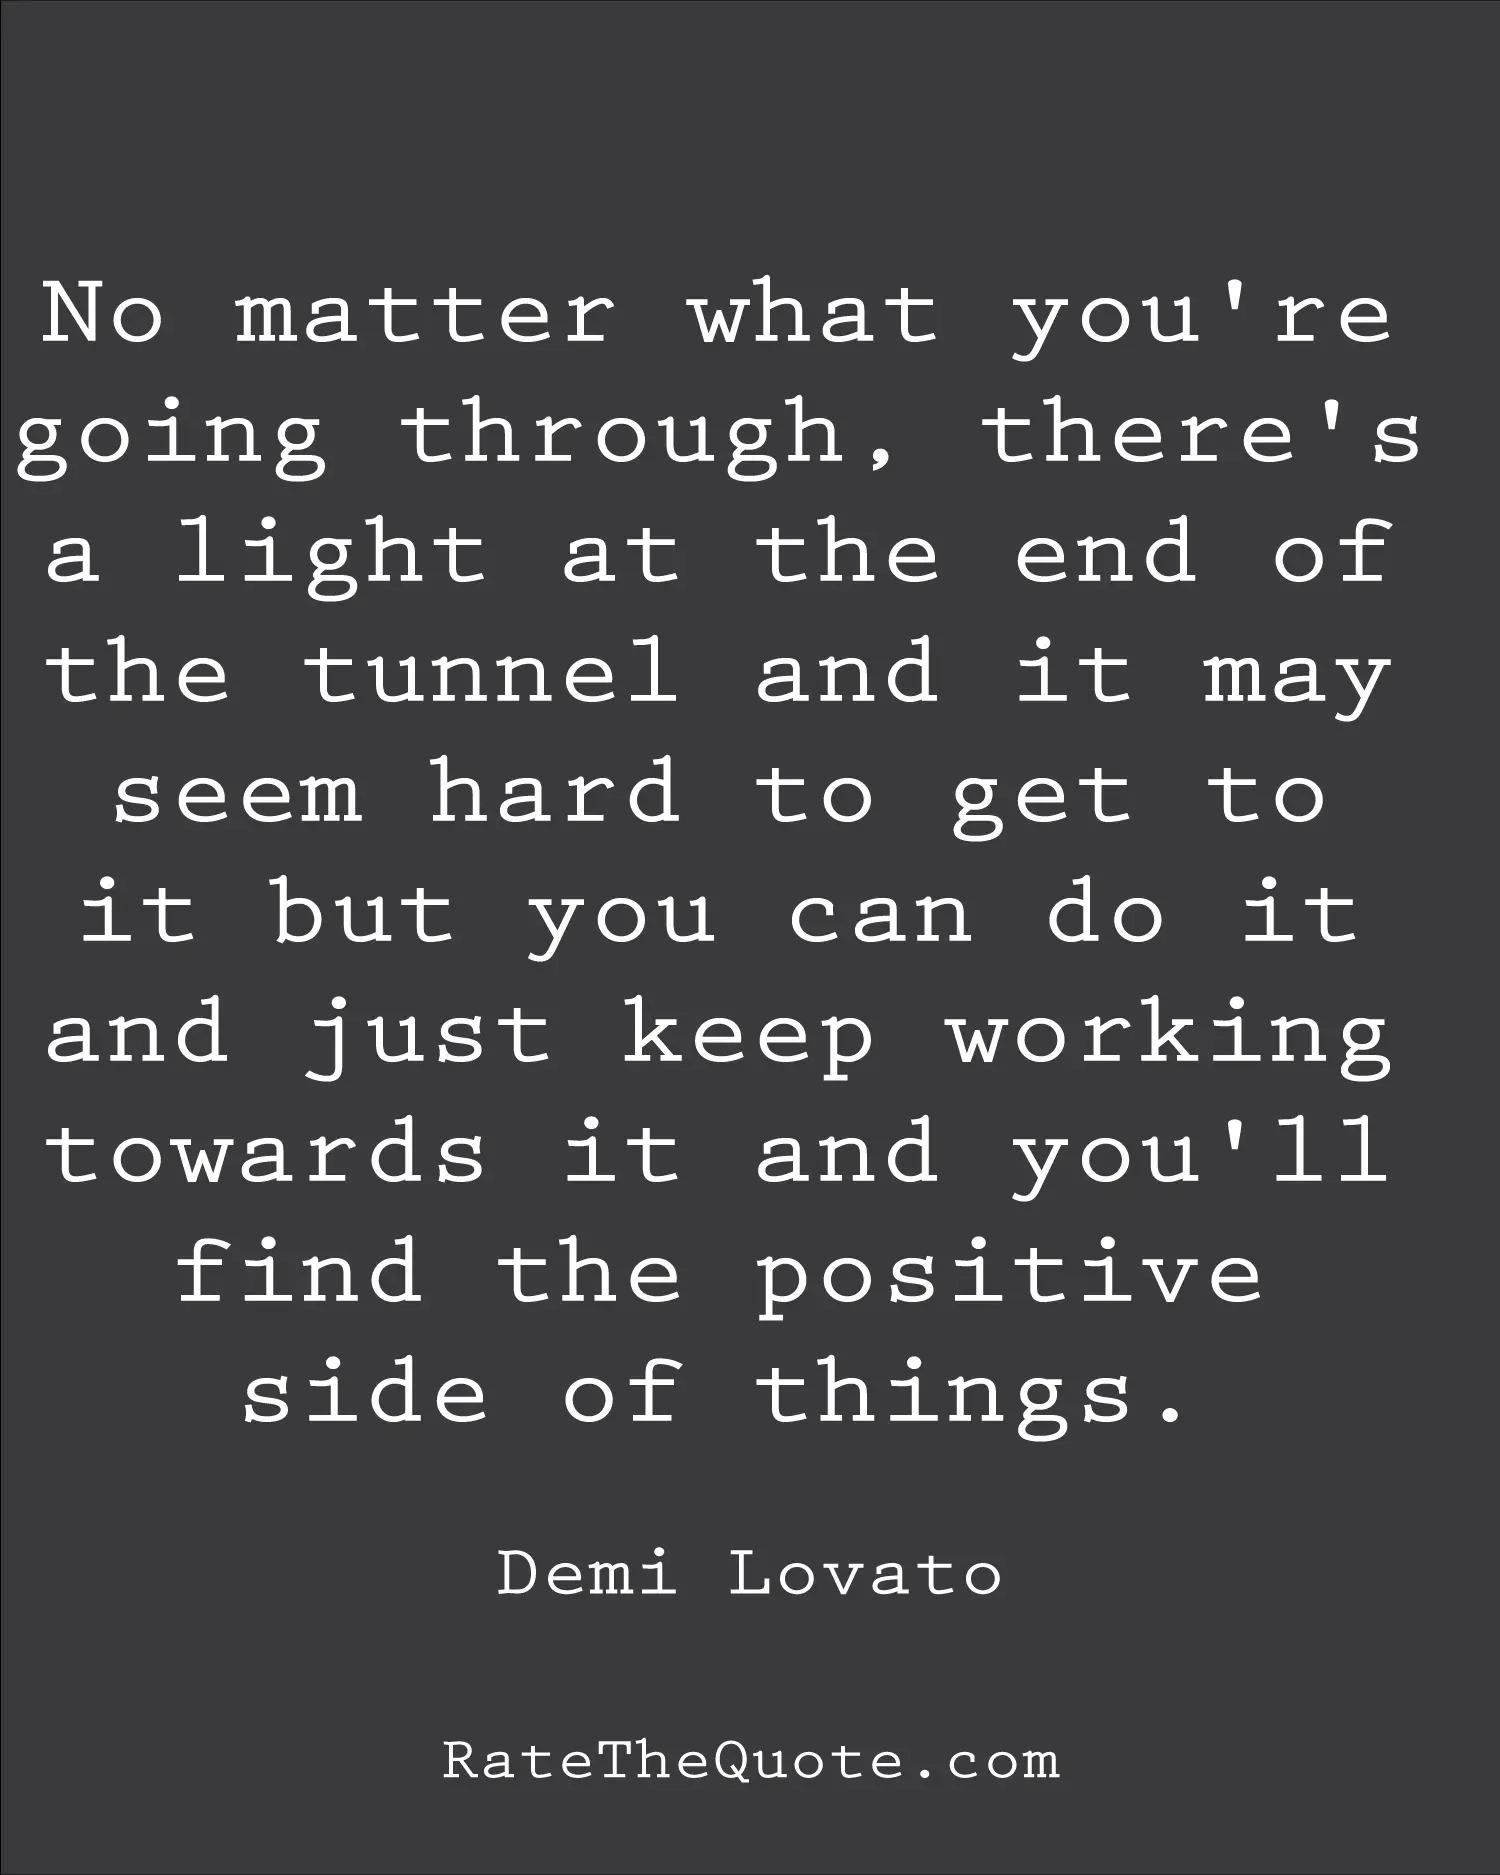 No matter what you're going through, there's a light at the end of the tunnel and it may seem hard to get to it but you can do it and just keep working towards it and you'll find the positive side of things. Demi Lovato